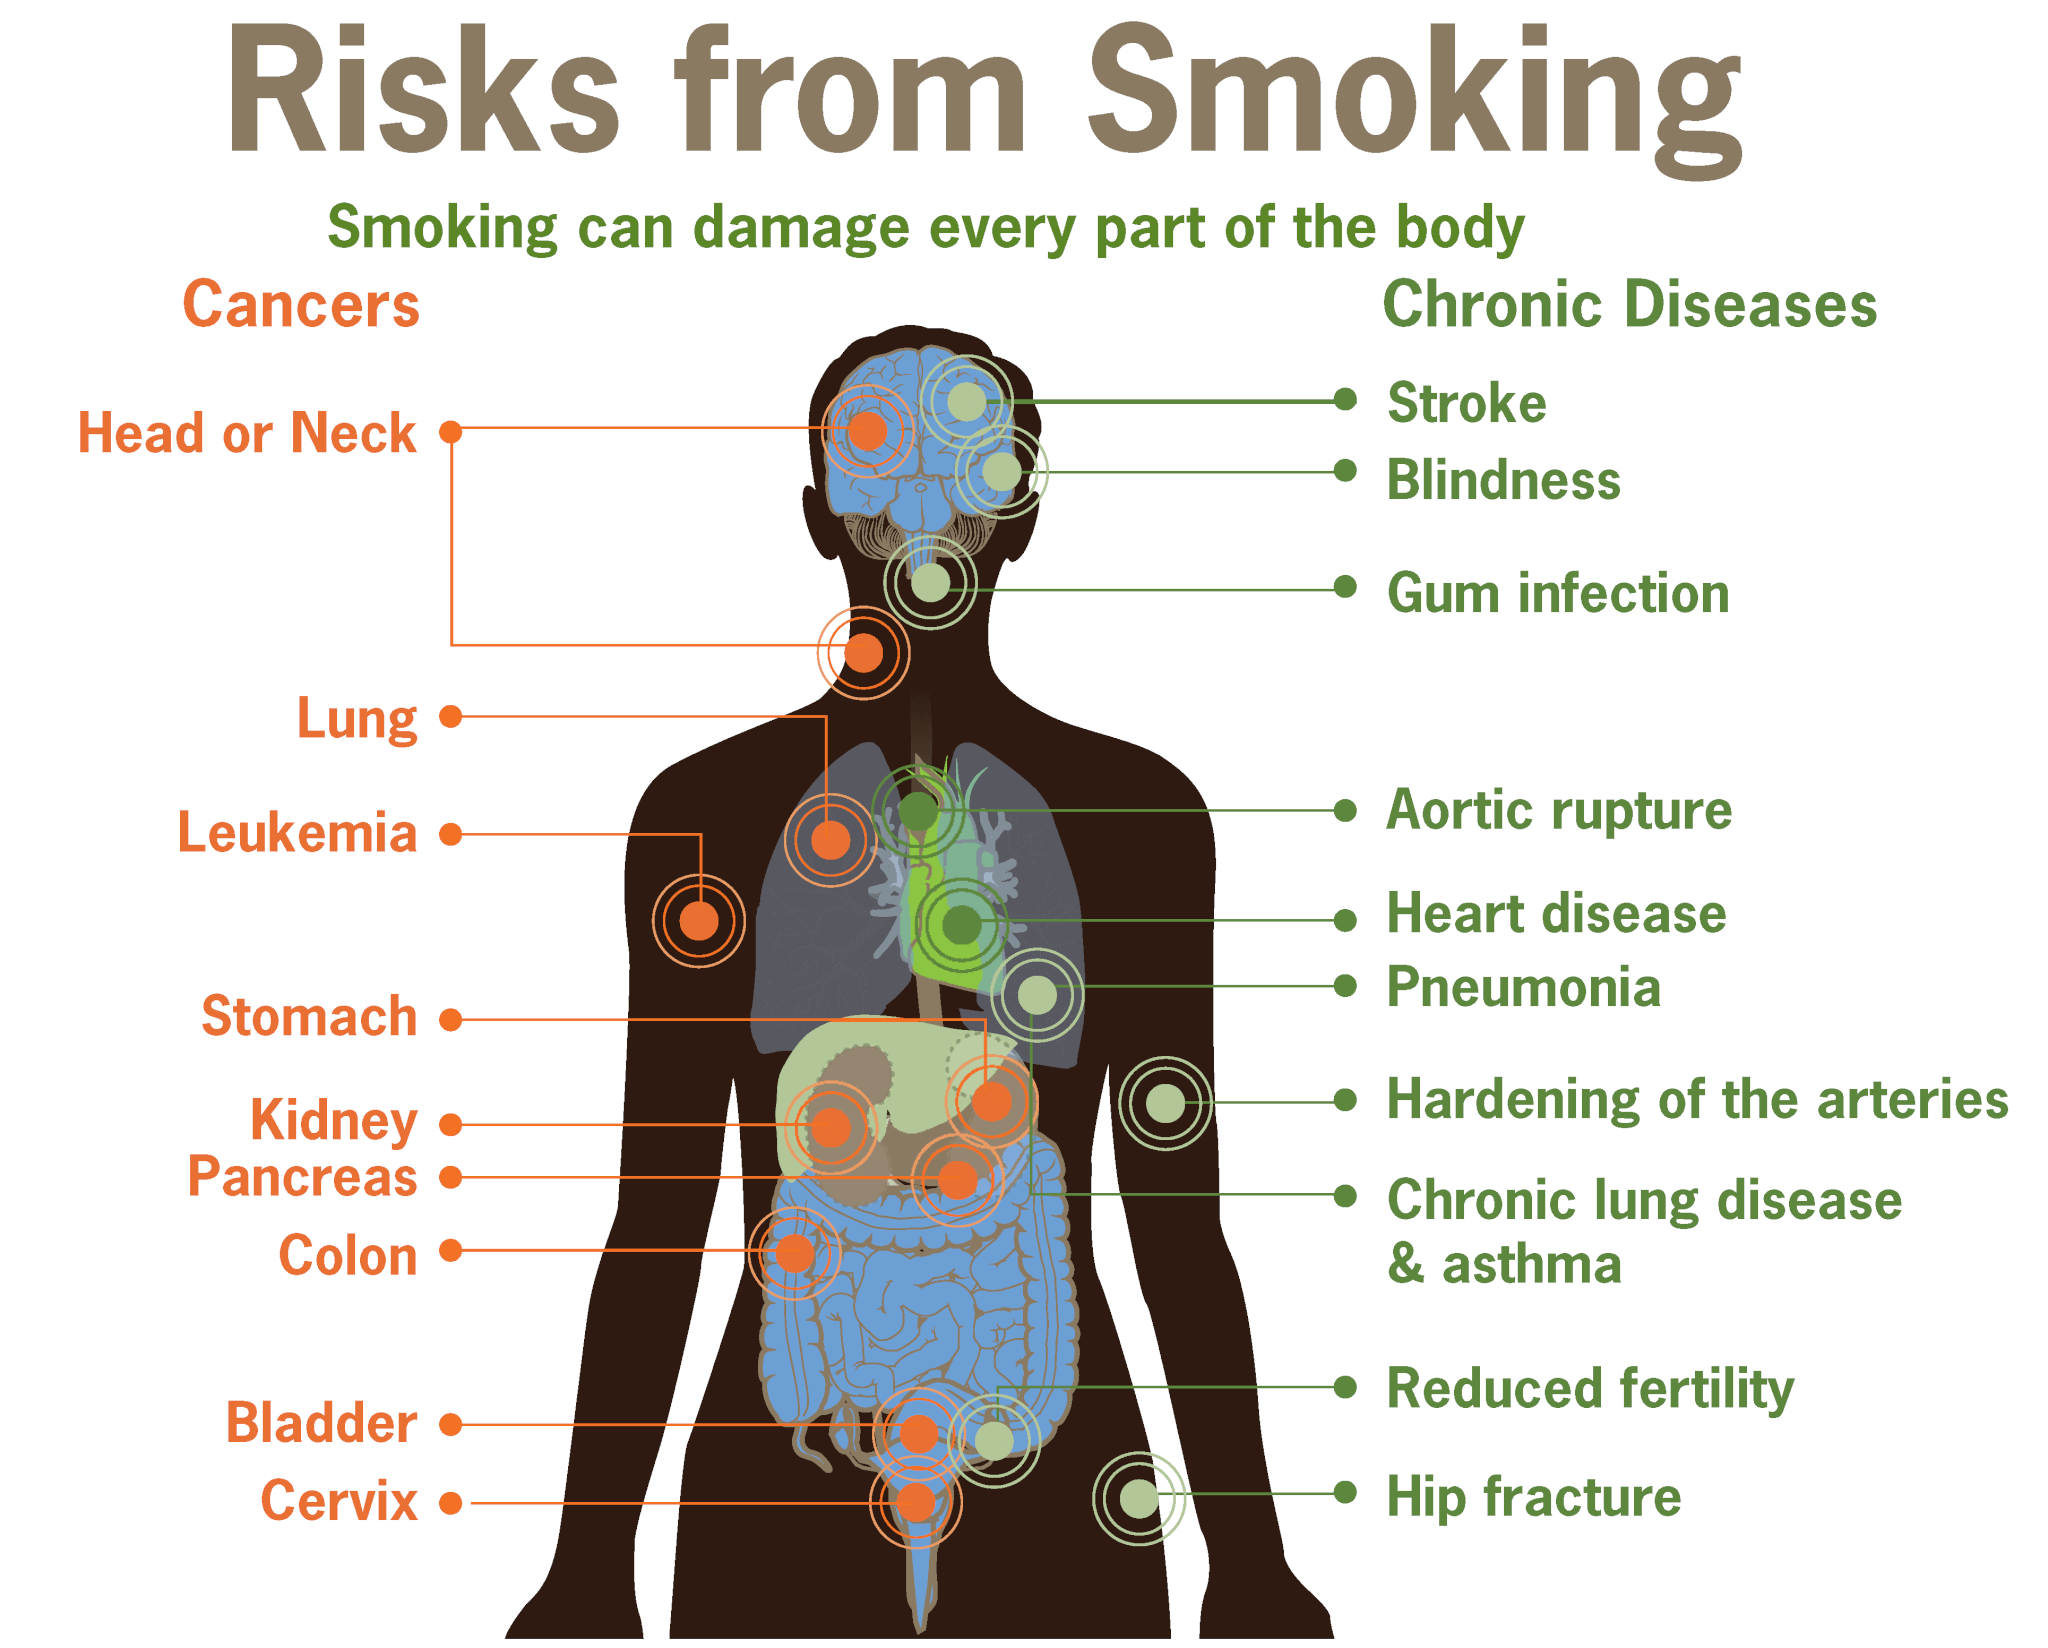 Smoking can damage every part of the body